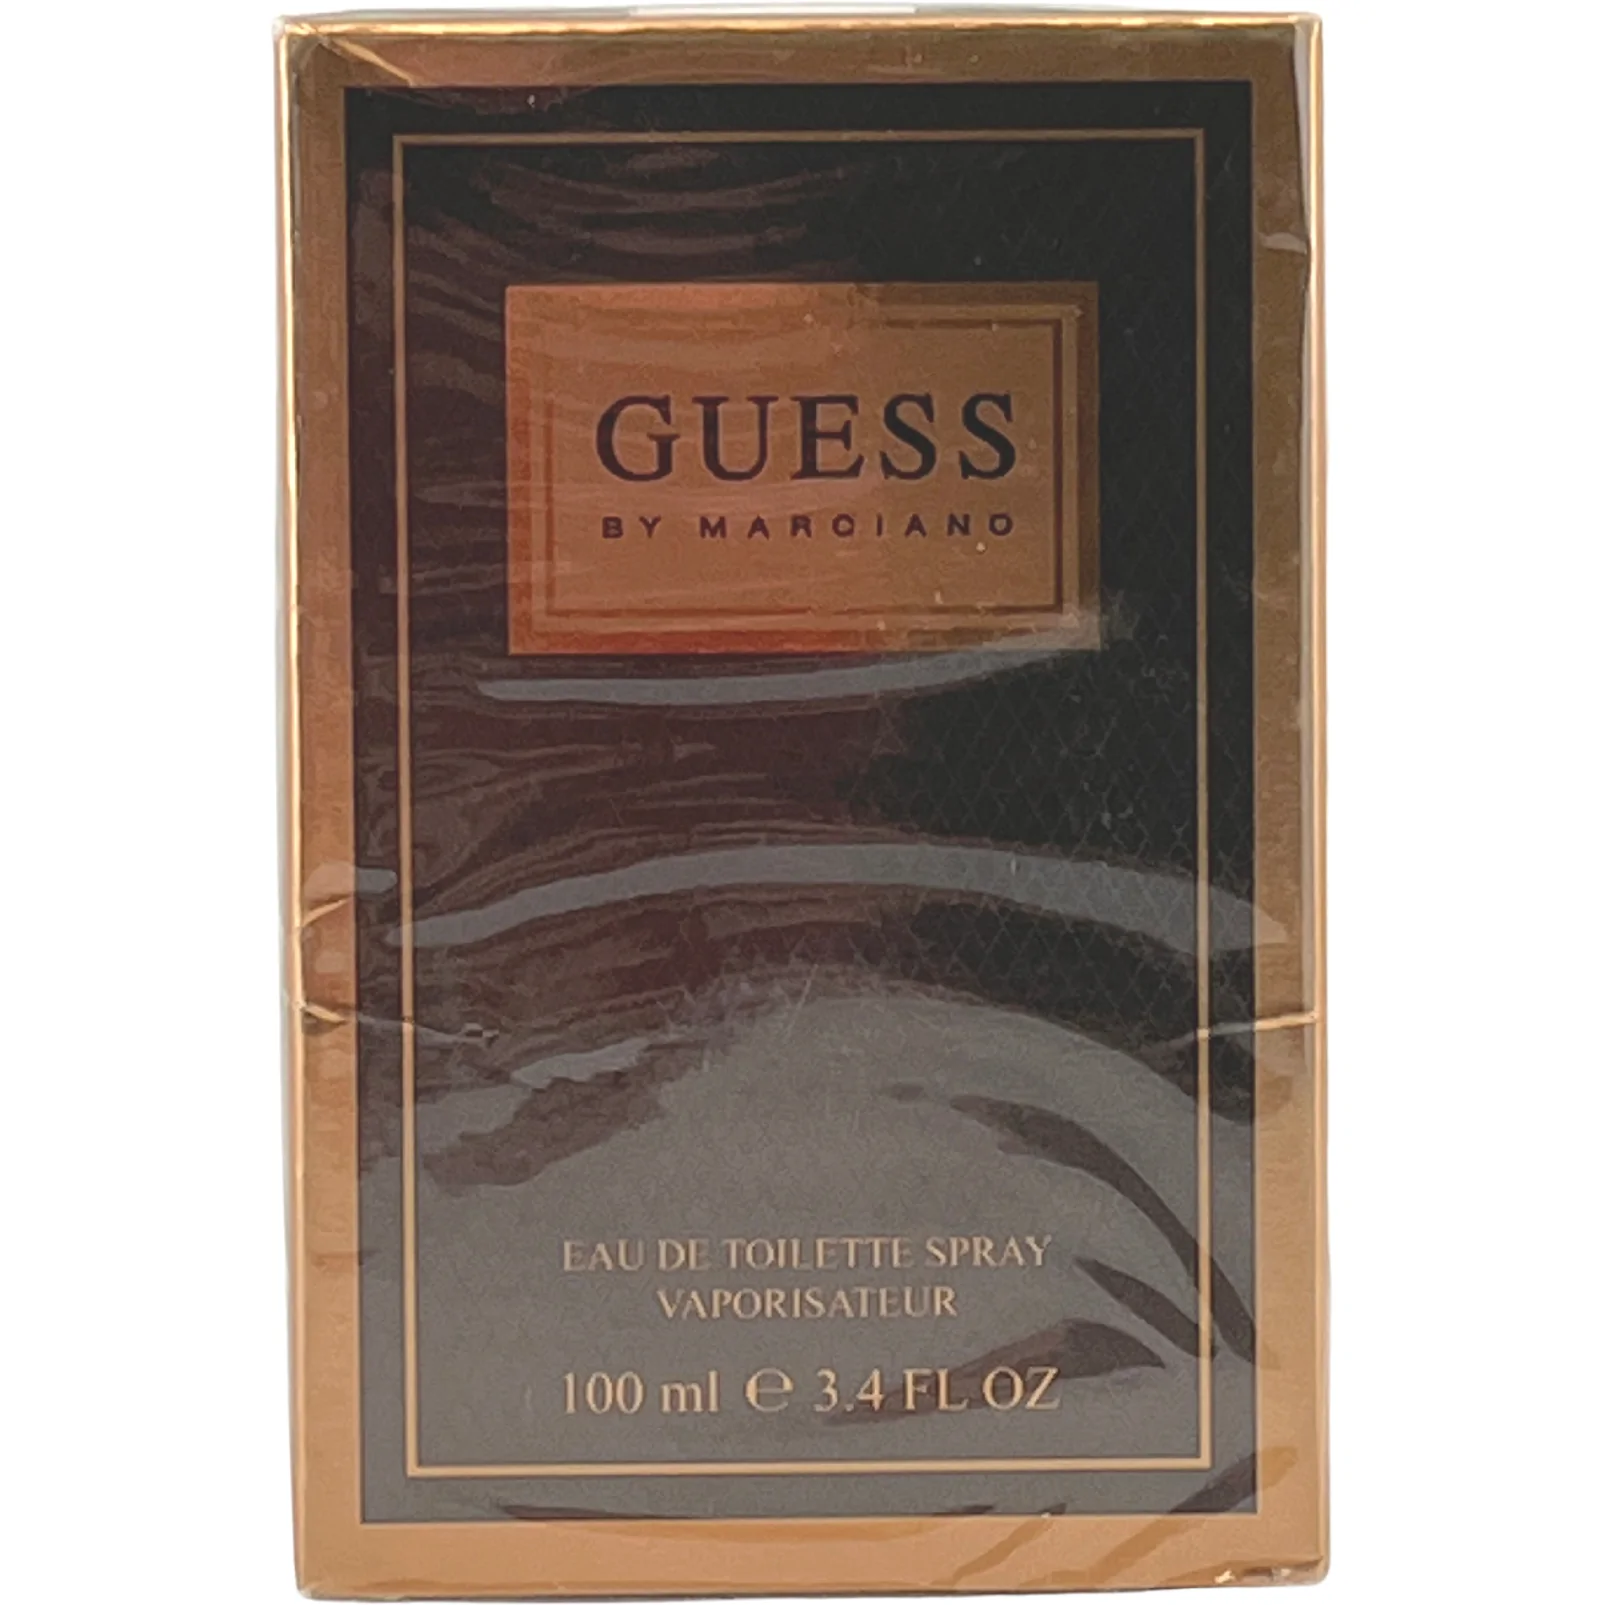 Guess by Marciano Men's Perfume: Men's Cologne / 100 ml